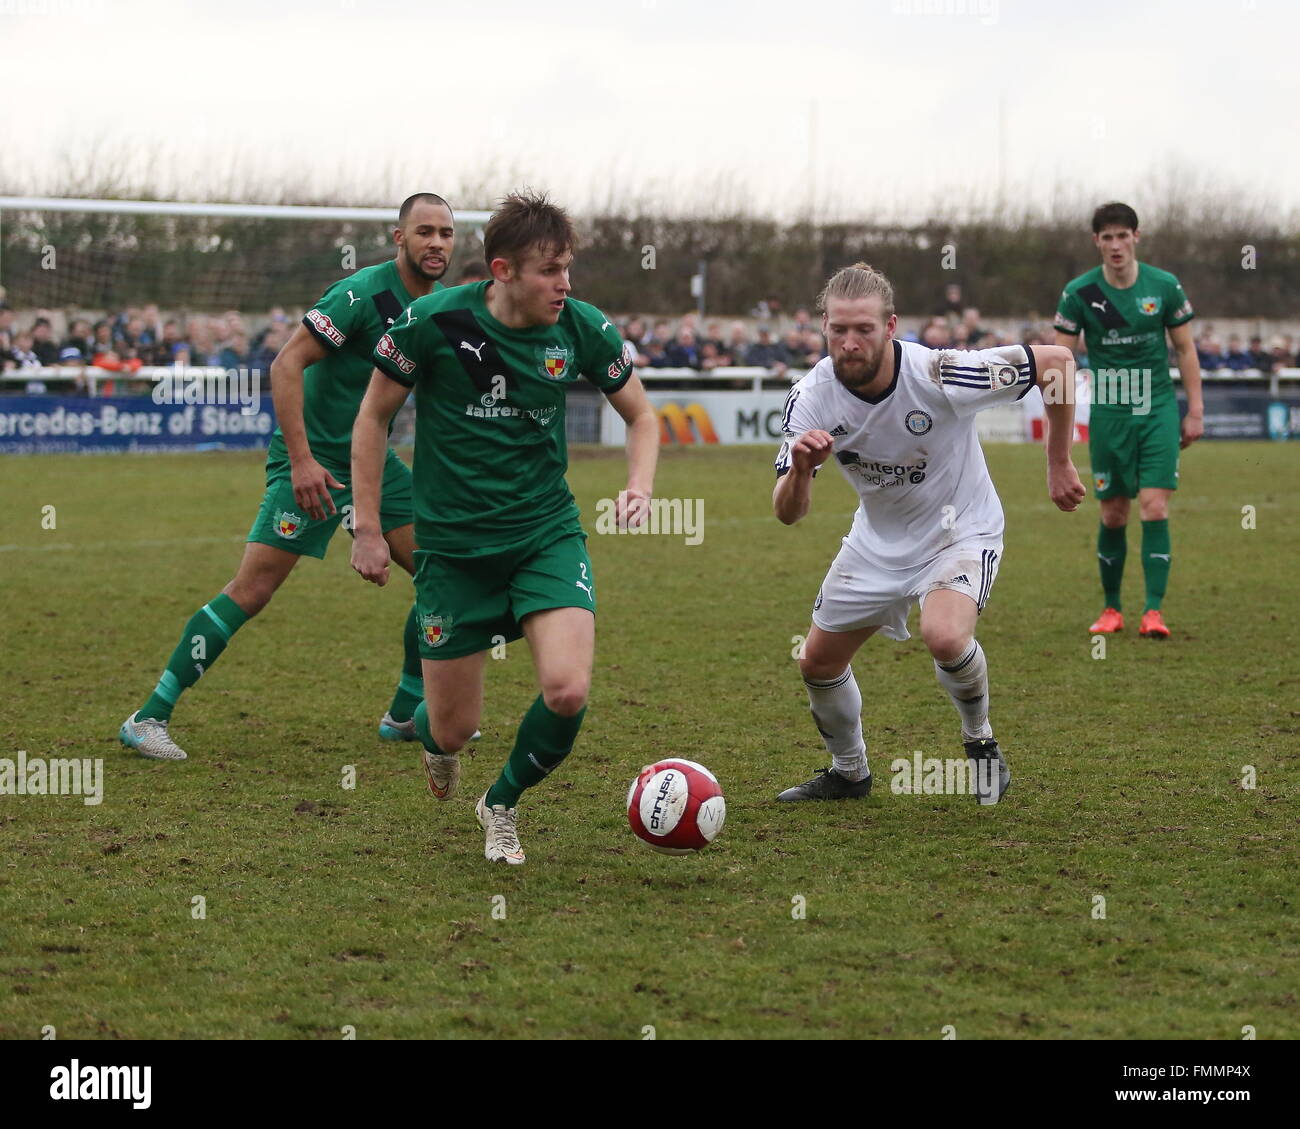 Nantwich, Cheshire. UK. 12th March, 2016. Nantwich Town lost 4-2 at home to FC Halifax Town in front of a crowd of 2078 in the FA Trophy Semi-Final 1st leg. Andy White of Nantwich Town advances with the ball. Credit:  Simon Newbury/Alamy Live News Stock Photo